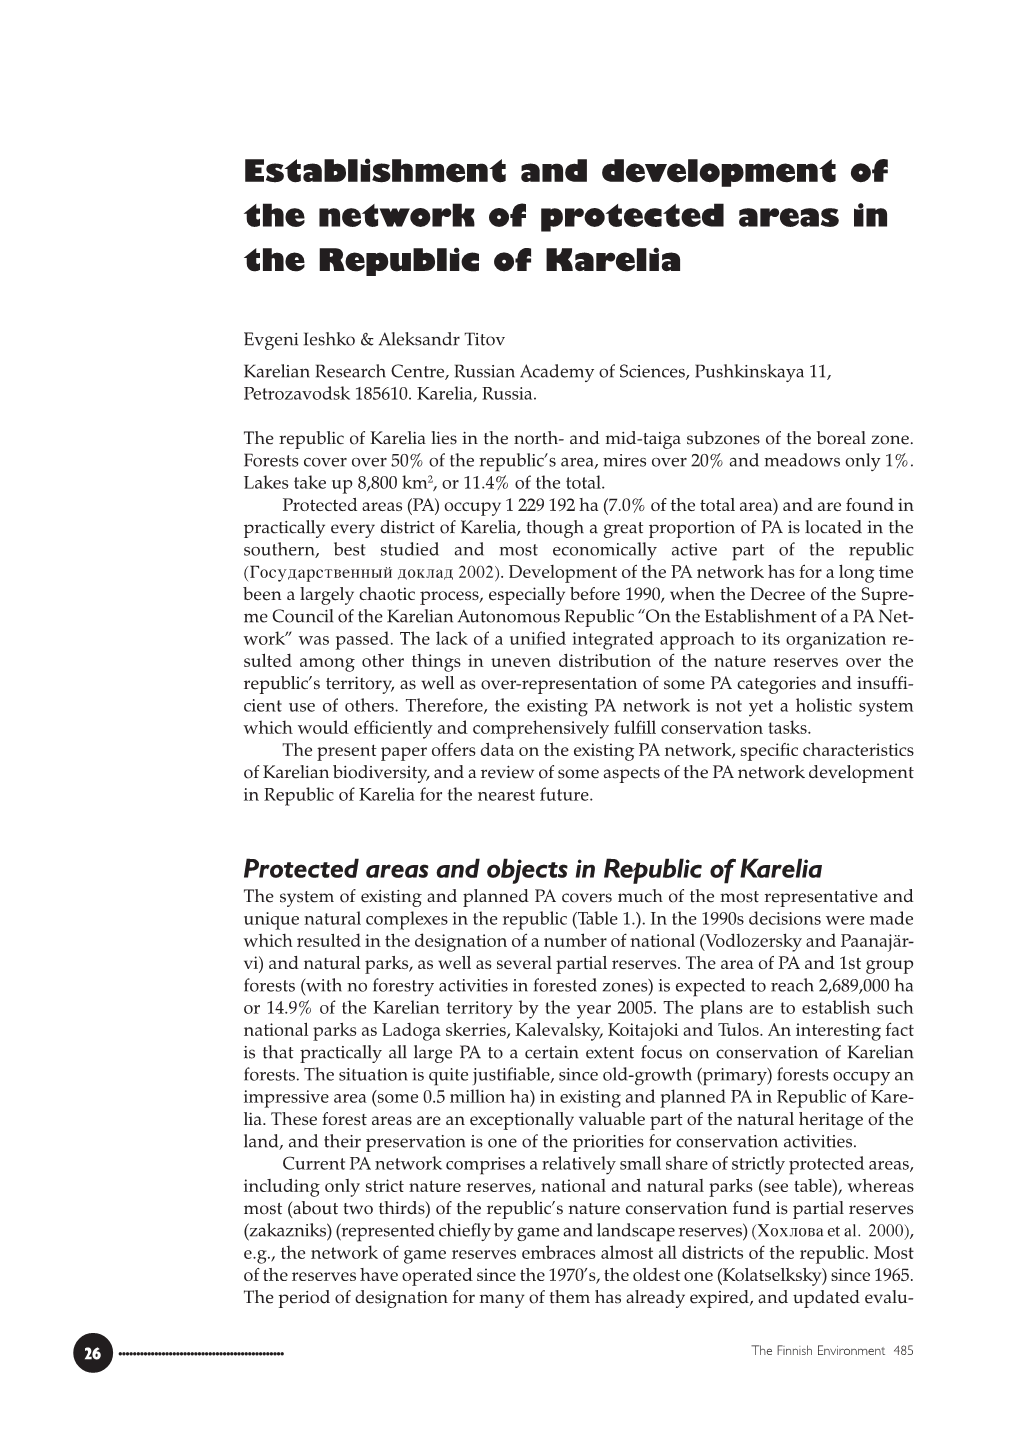 Establishment and Development of the Network of Protected Areas in the Republic of Karelia